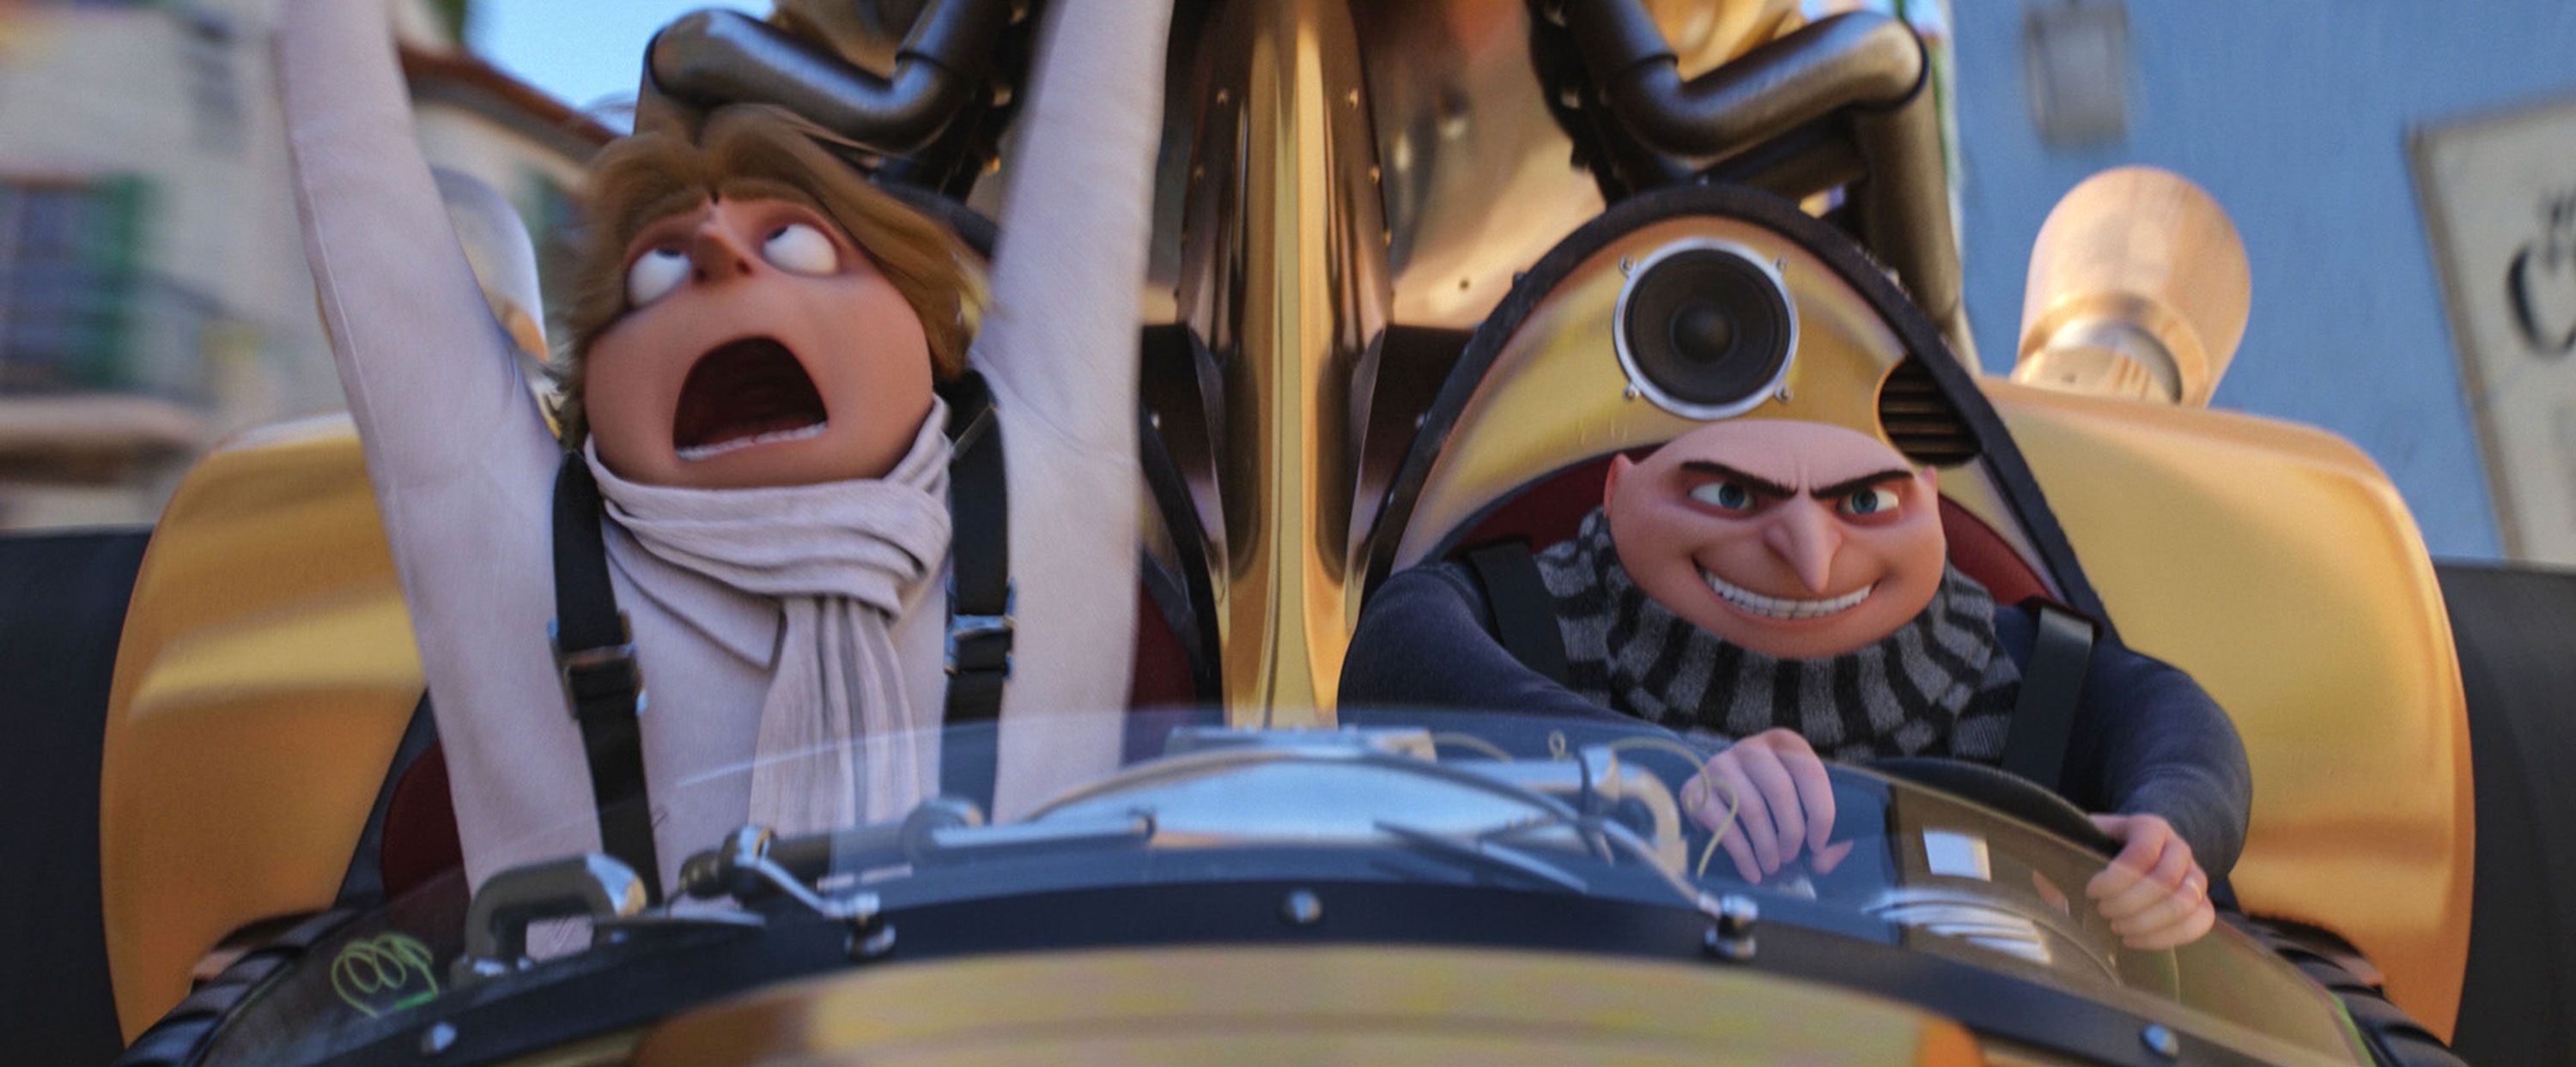 Despicable Me 4 release date, cast and more